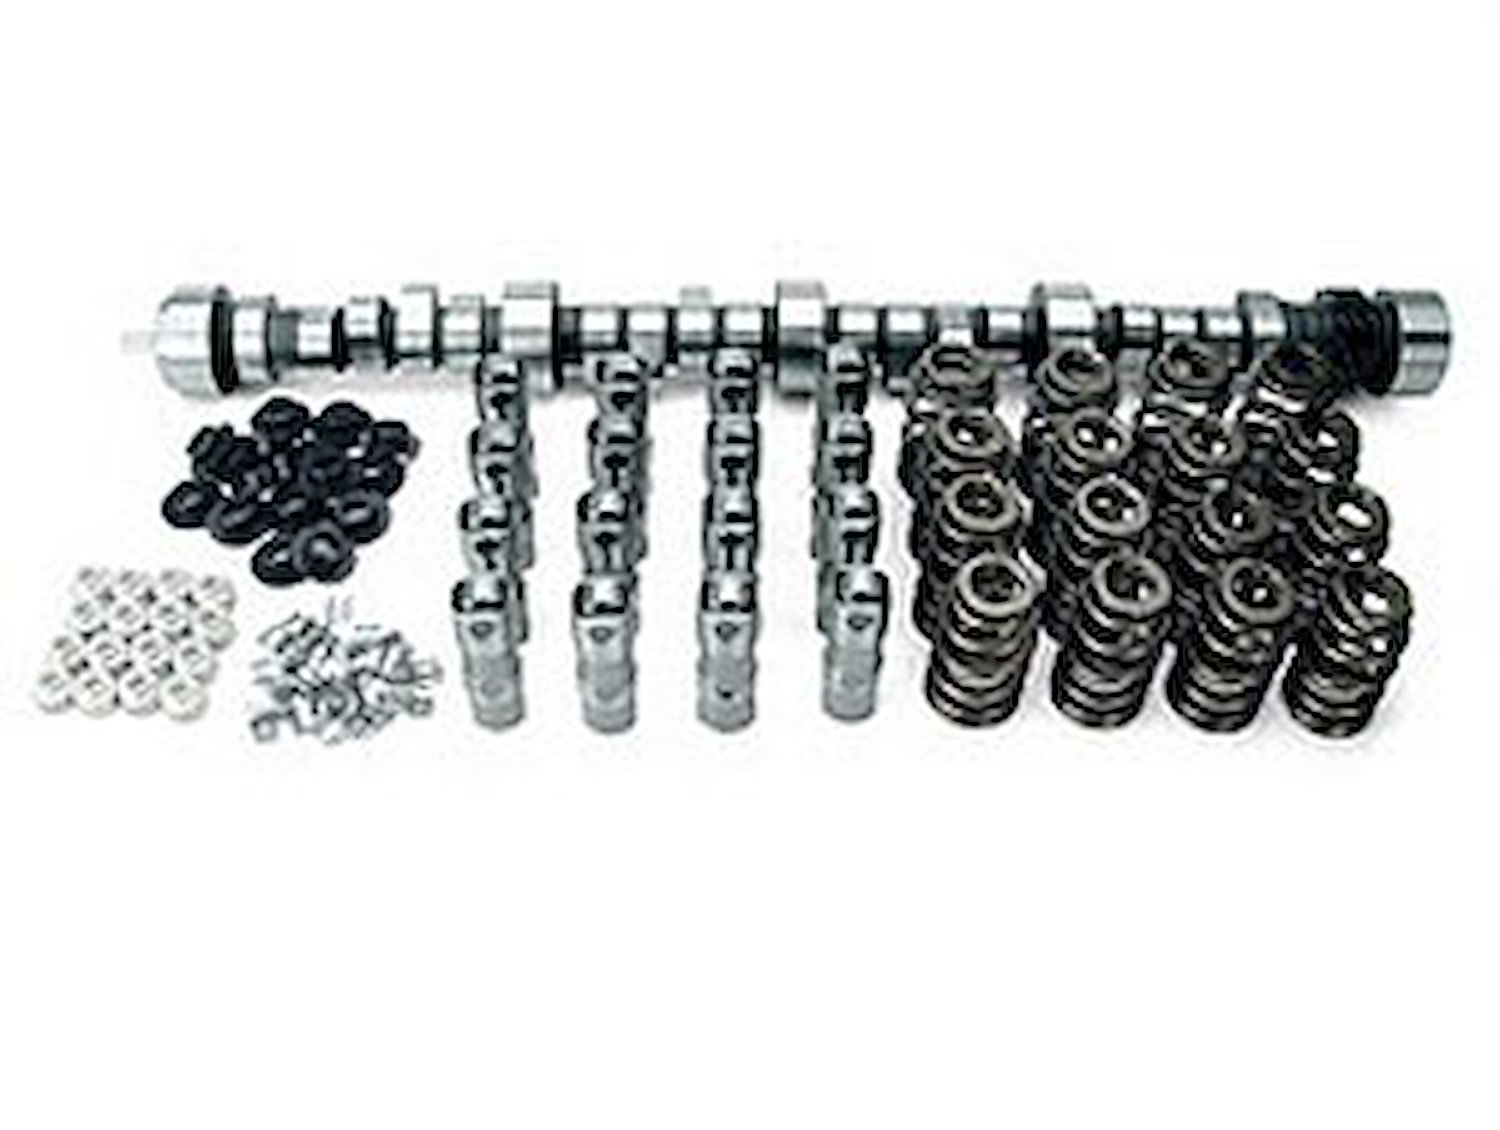 Computer Controlled Hydraulic Roller Tappet Camshaft Complete Kit RPM Range: 1000-5000